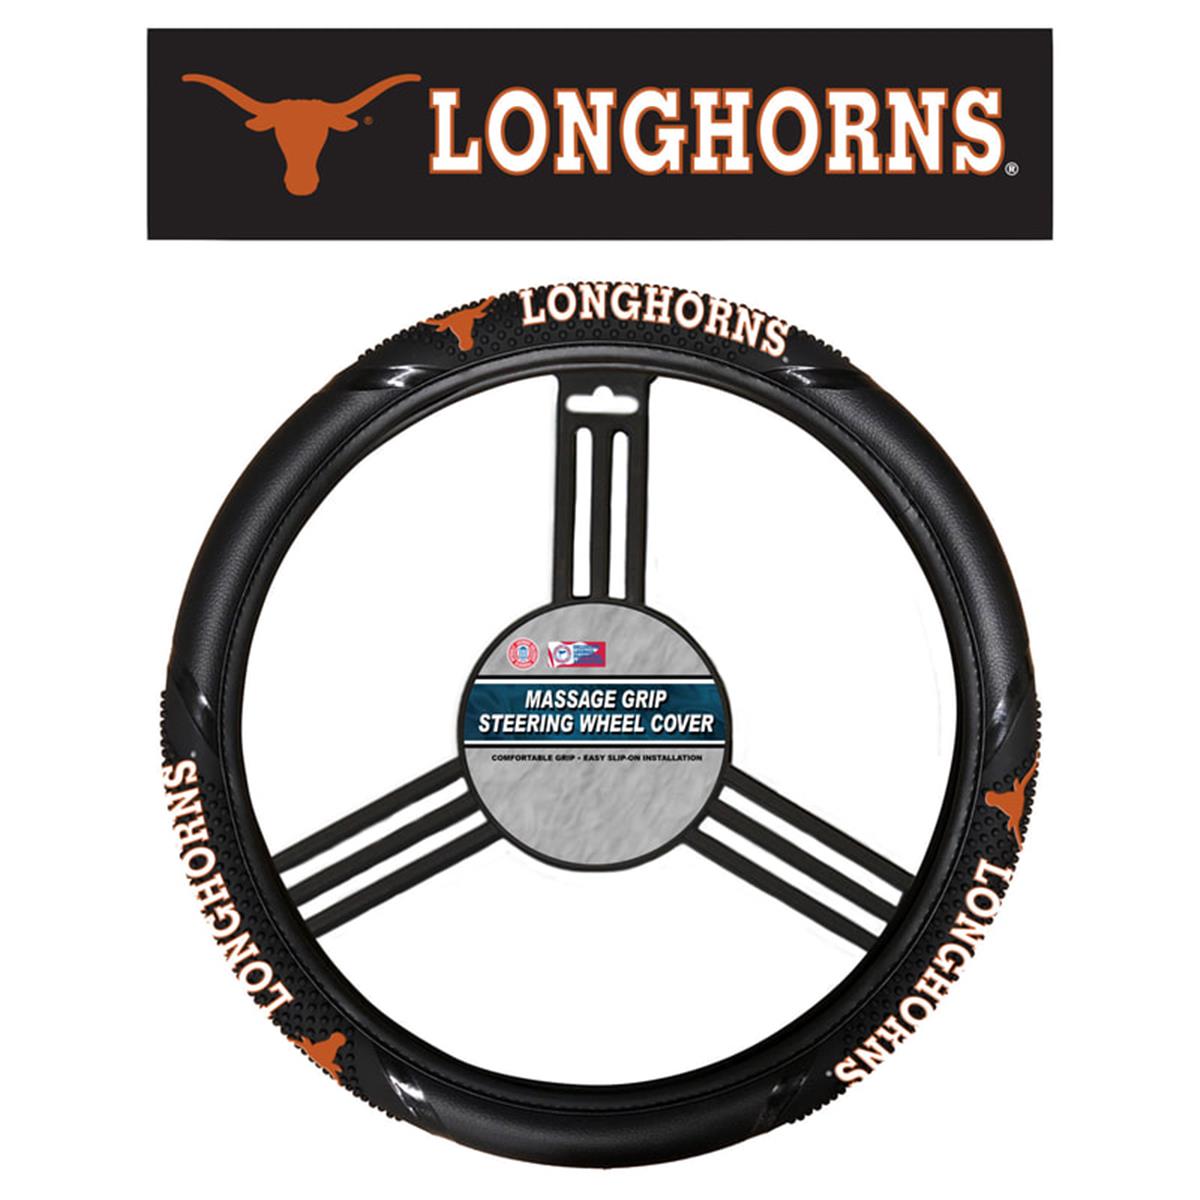 Picture of Fremont Die 2324556667 NCAA Texas Longhorns Steering Wheel Cover - Massage Grip Style